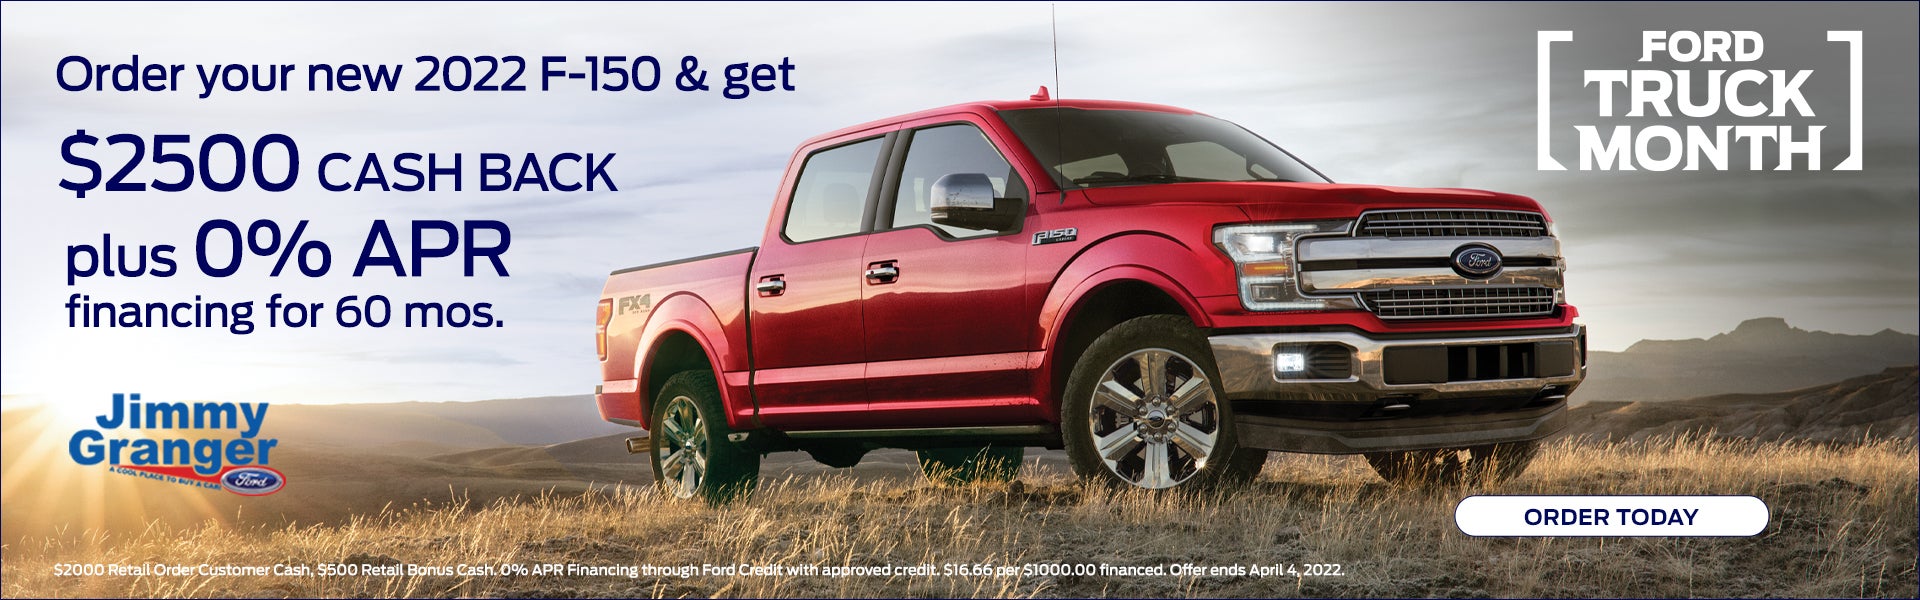 Custom Order Your New Ford and Save!